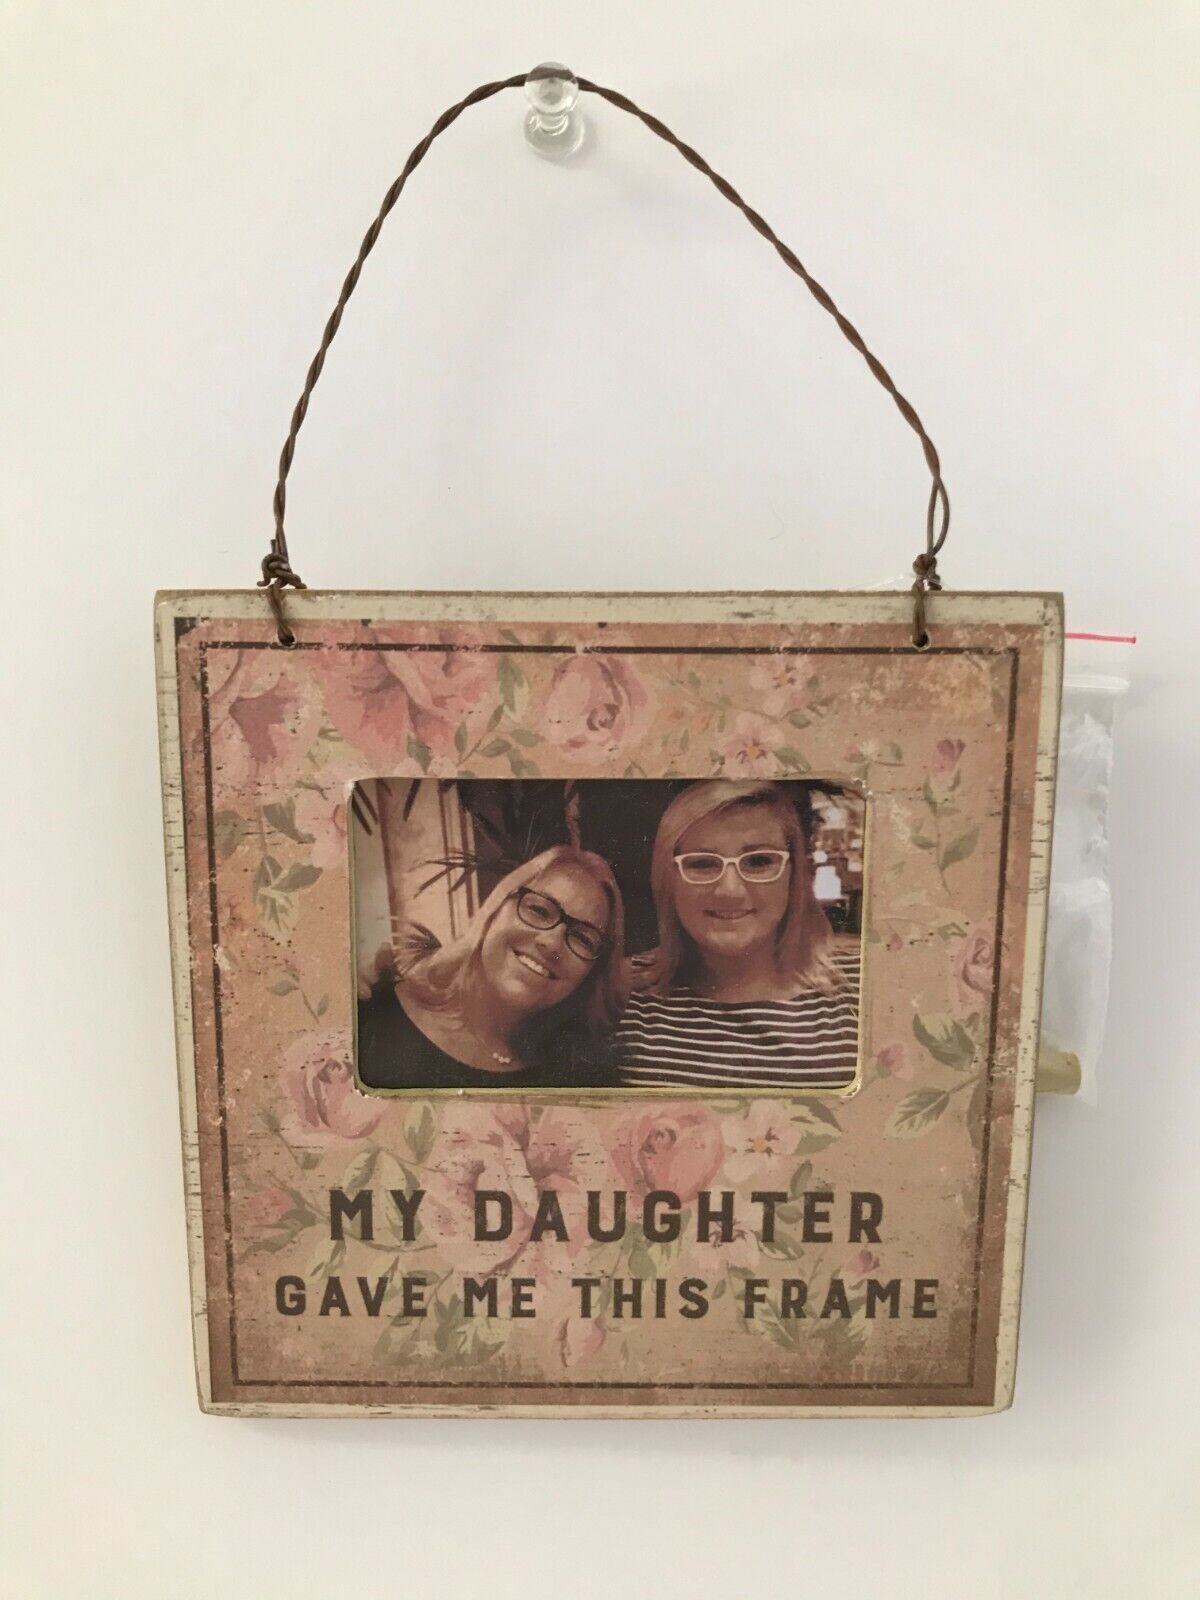 PRIMITIVES BY KATHY MINI FRAME (My Daughter Gave Me This Frame)2"x3" inset (NEW) - $5.35